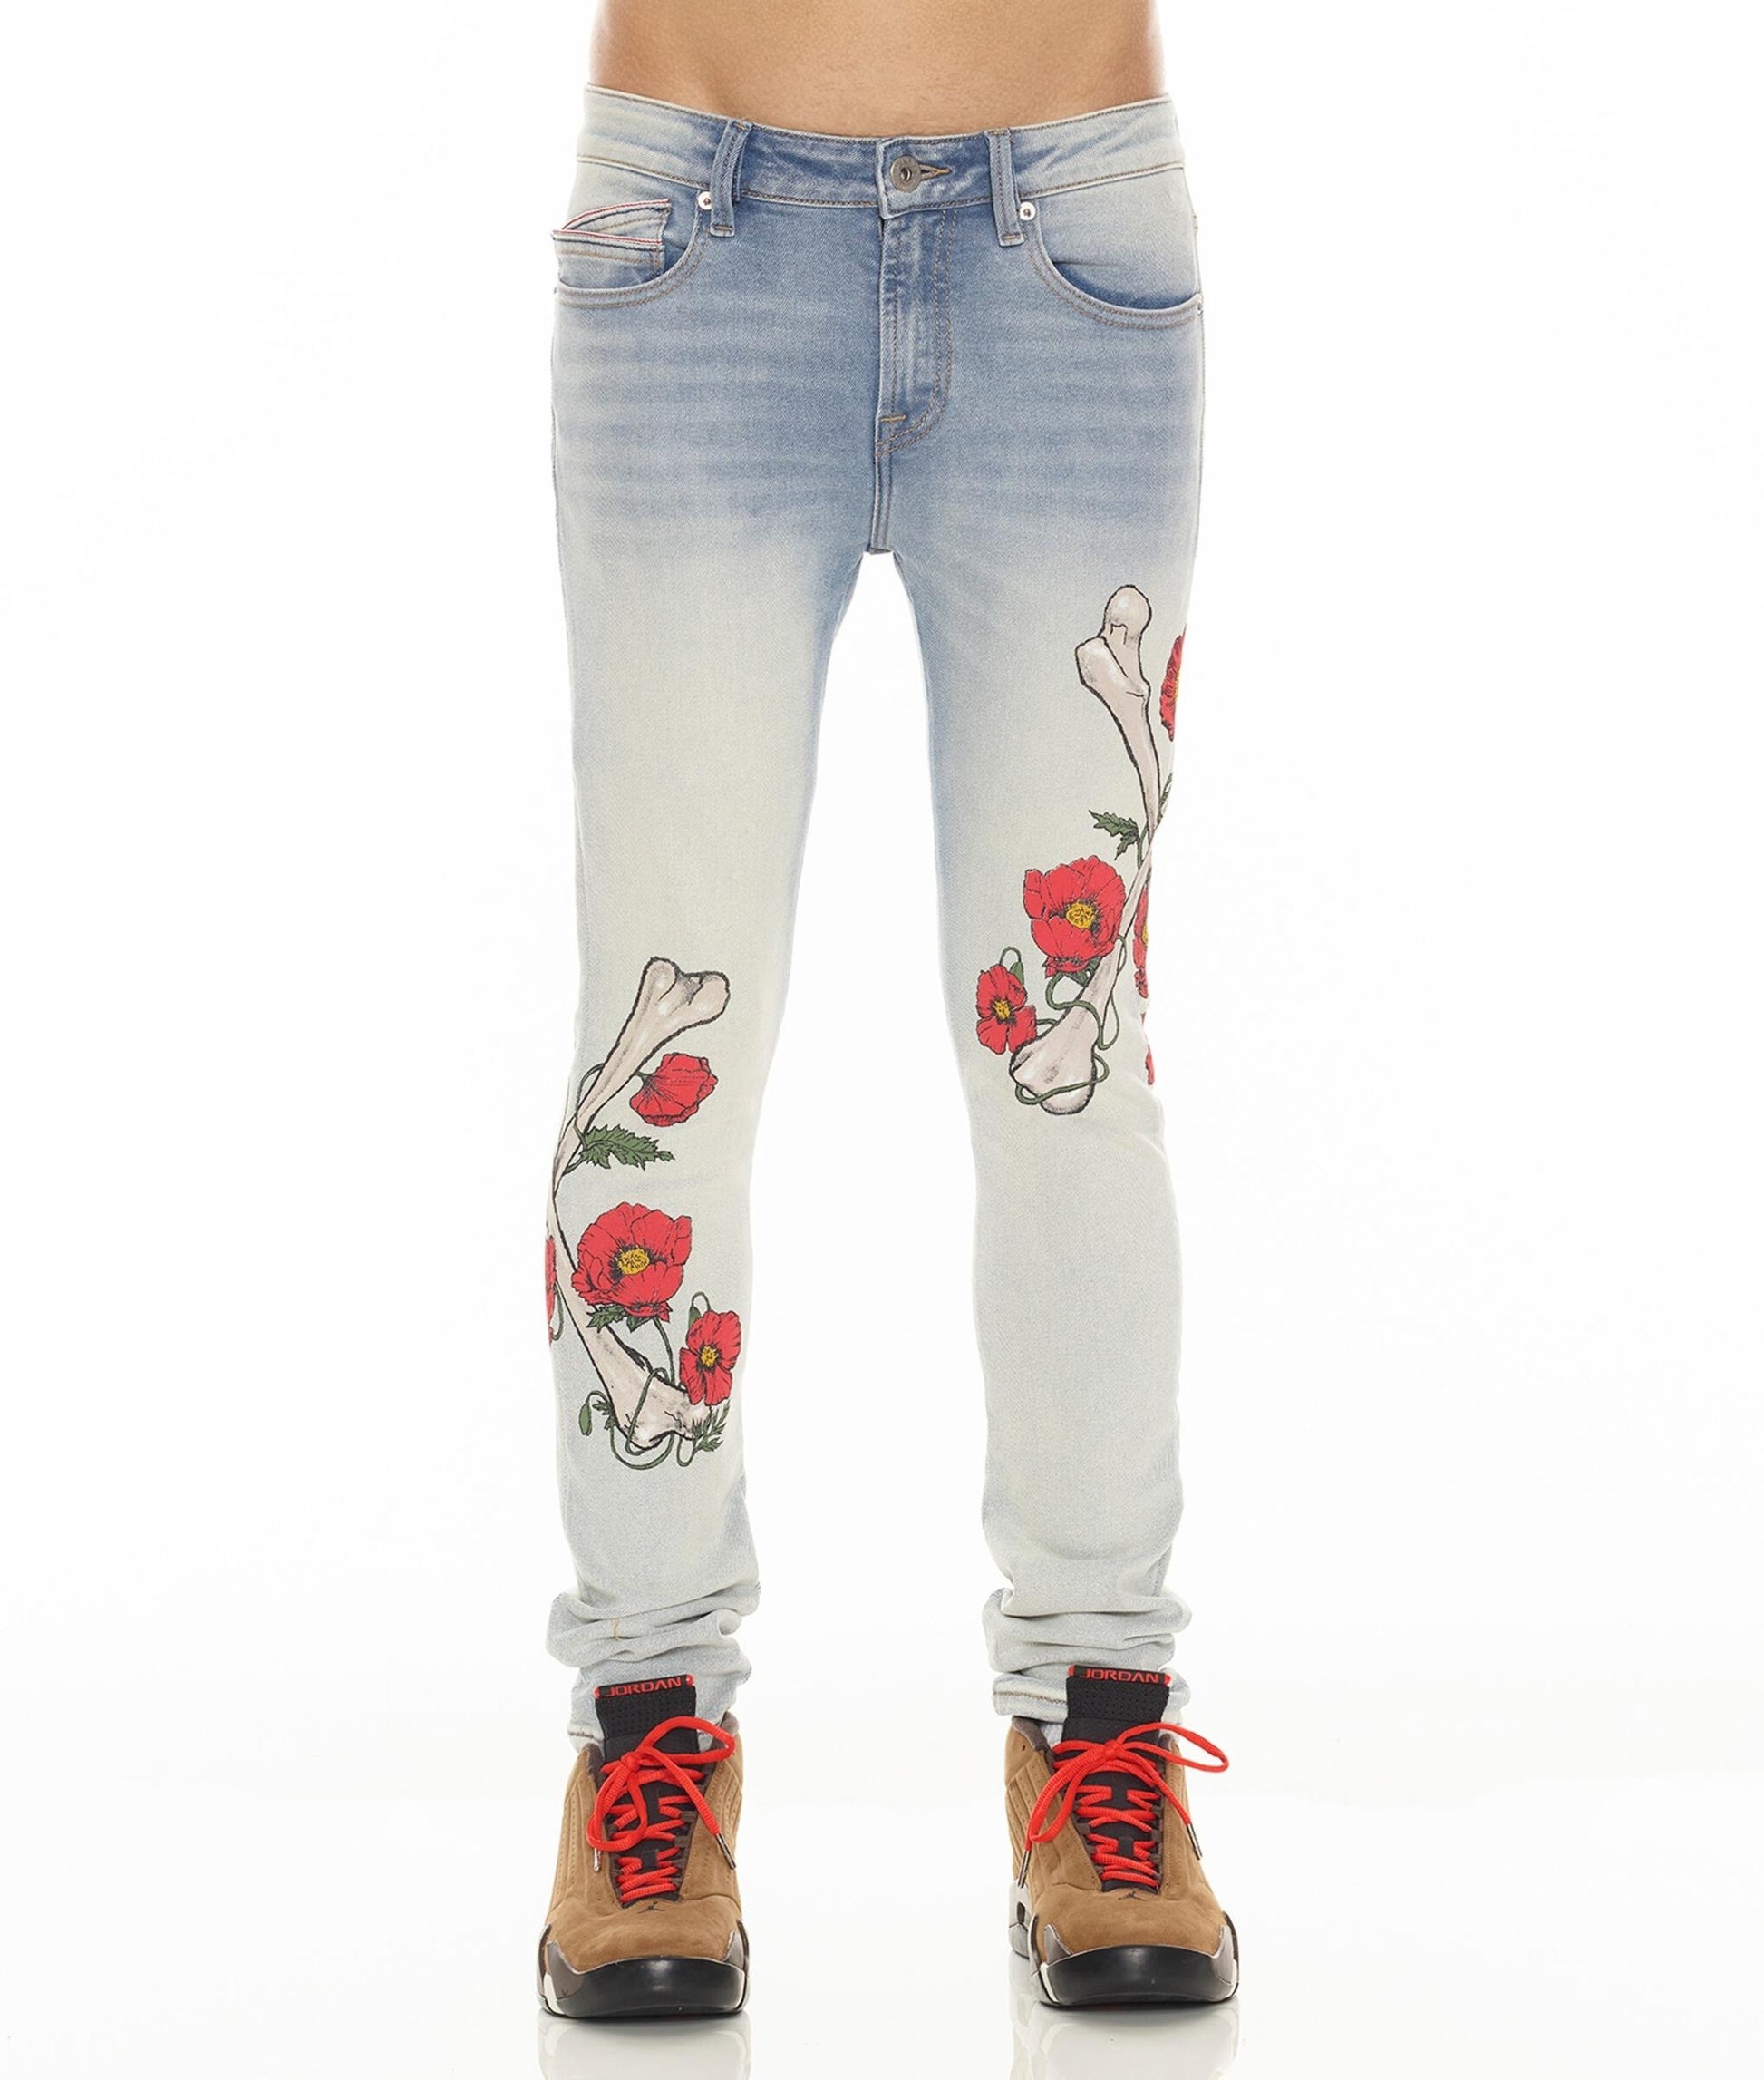 Jeans, Skinny Jeans, Blue Jeans, Cult Of Individuality, Men, Boys, Teens, Gifts, Wmns, Girls,Urban, Style, Fashion, Ripped Jeans,Flowers, 